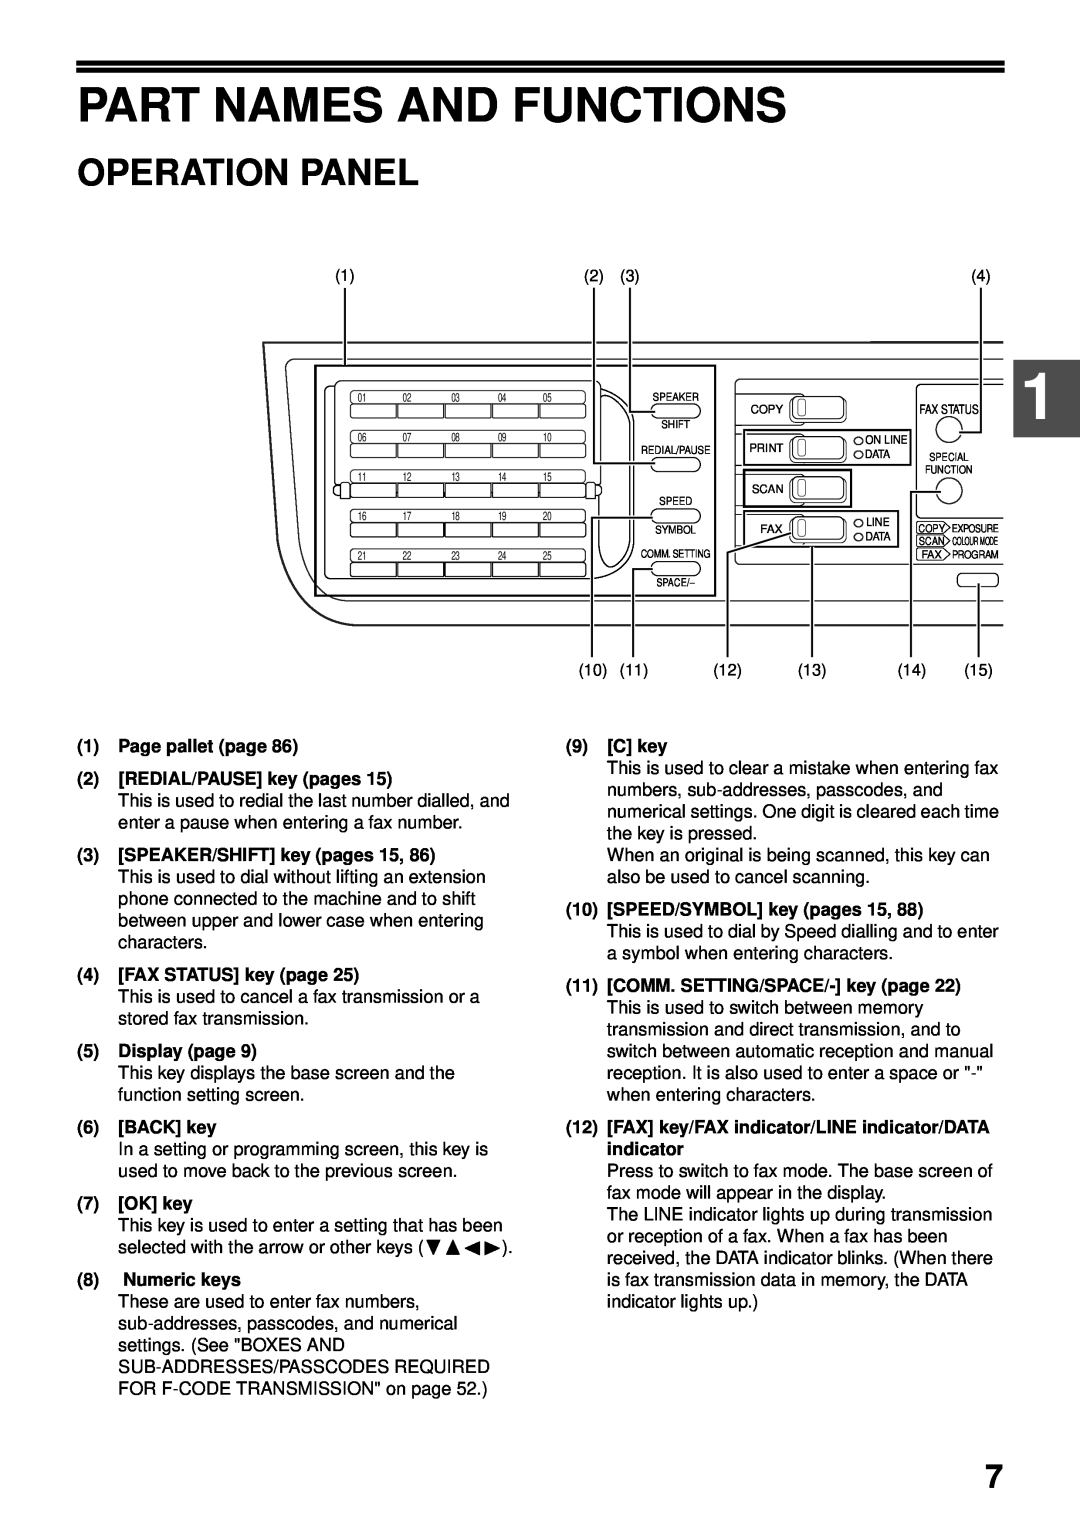 Sharp MX-FX13 Part Names And Functions, Operation Panel, Page pallet page 2 REDIAL/PAUSE key pages, FAX STATUS key page 